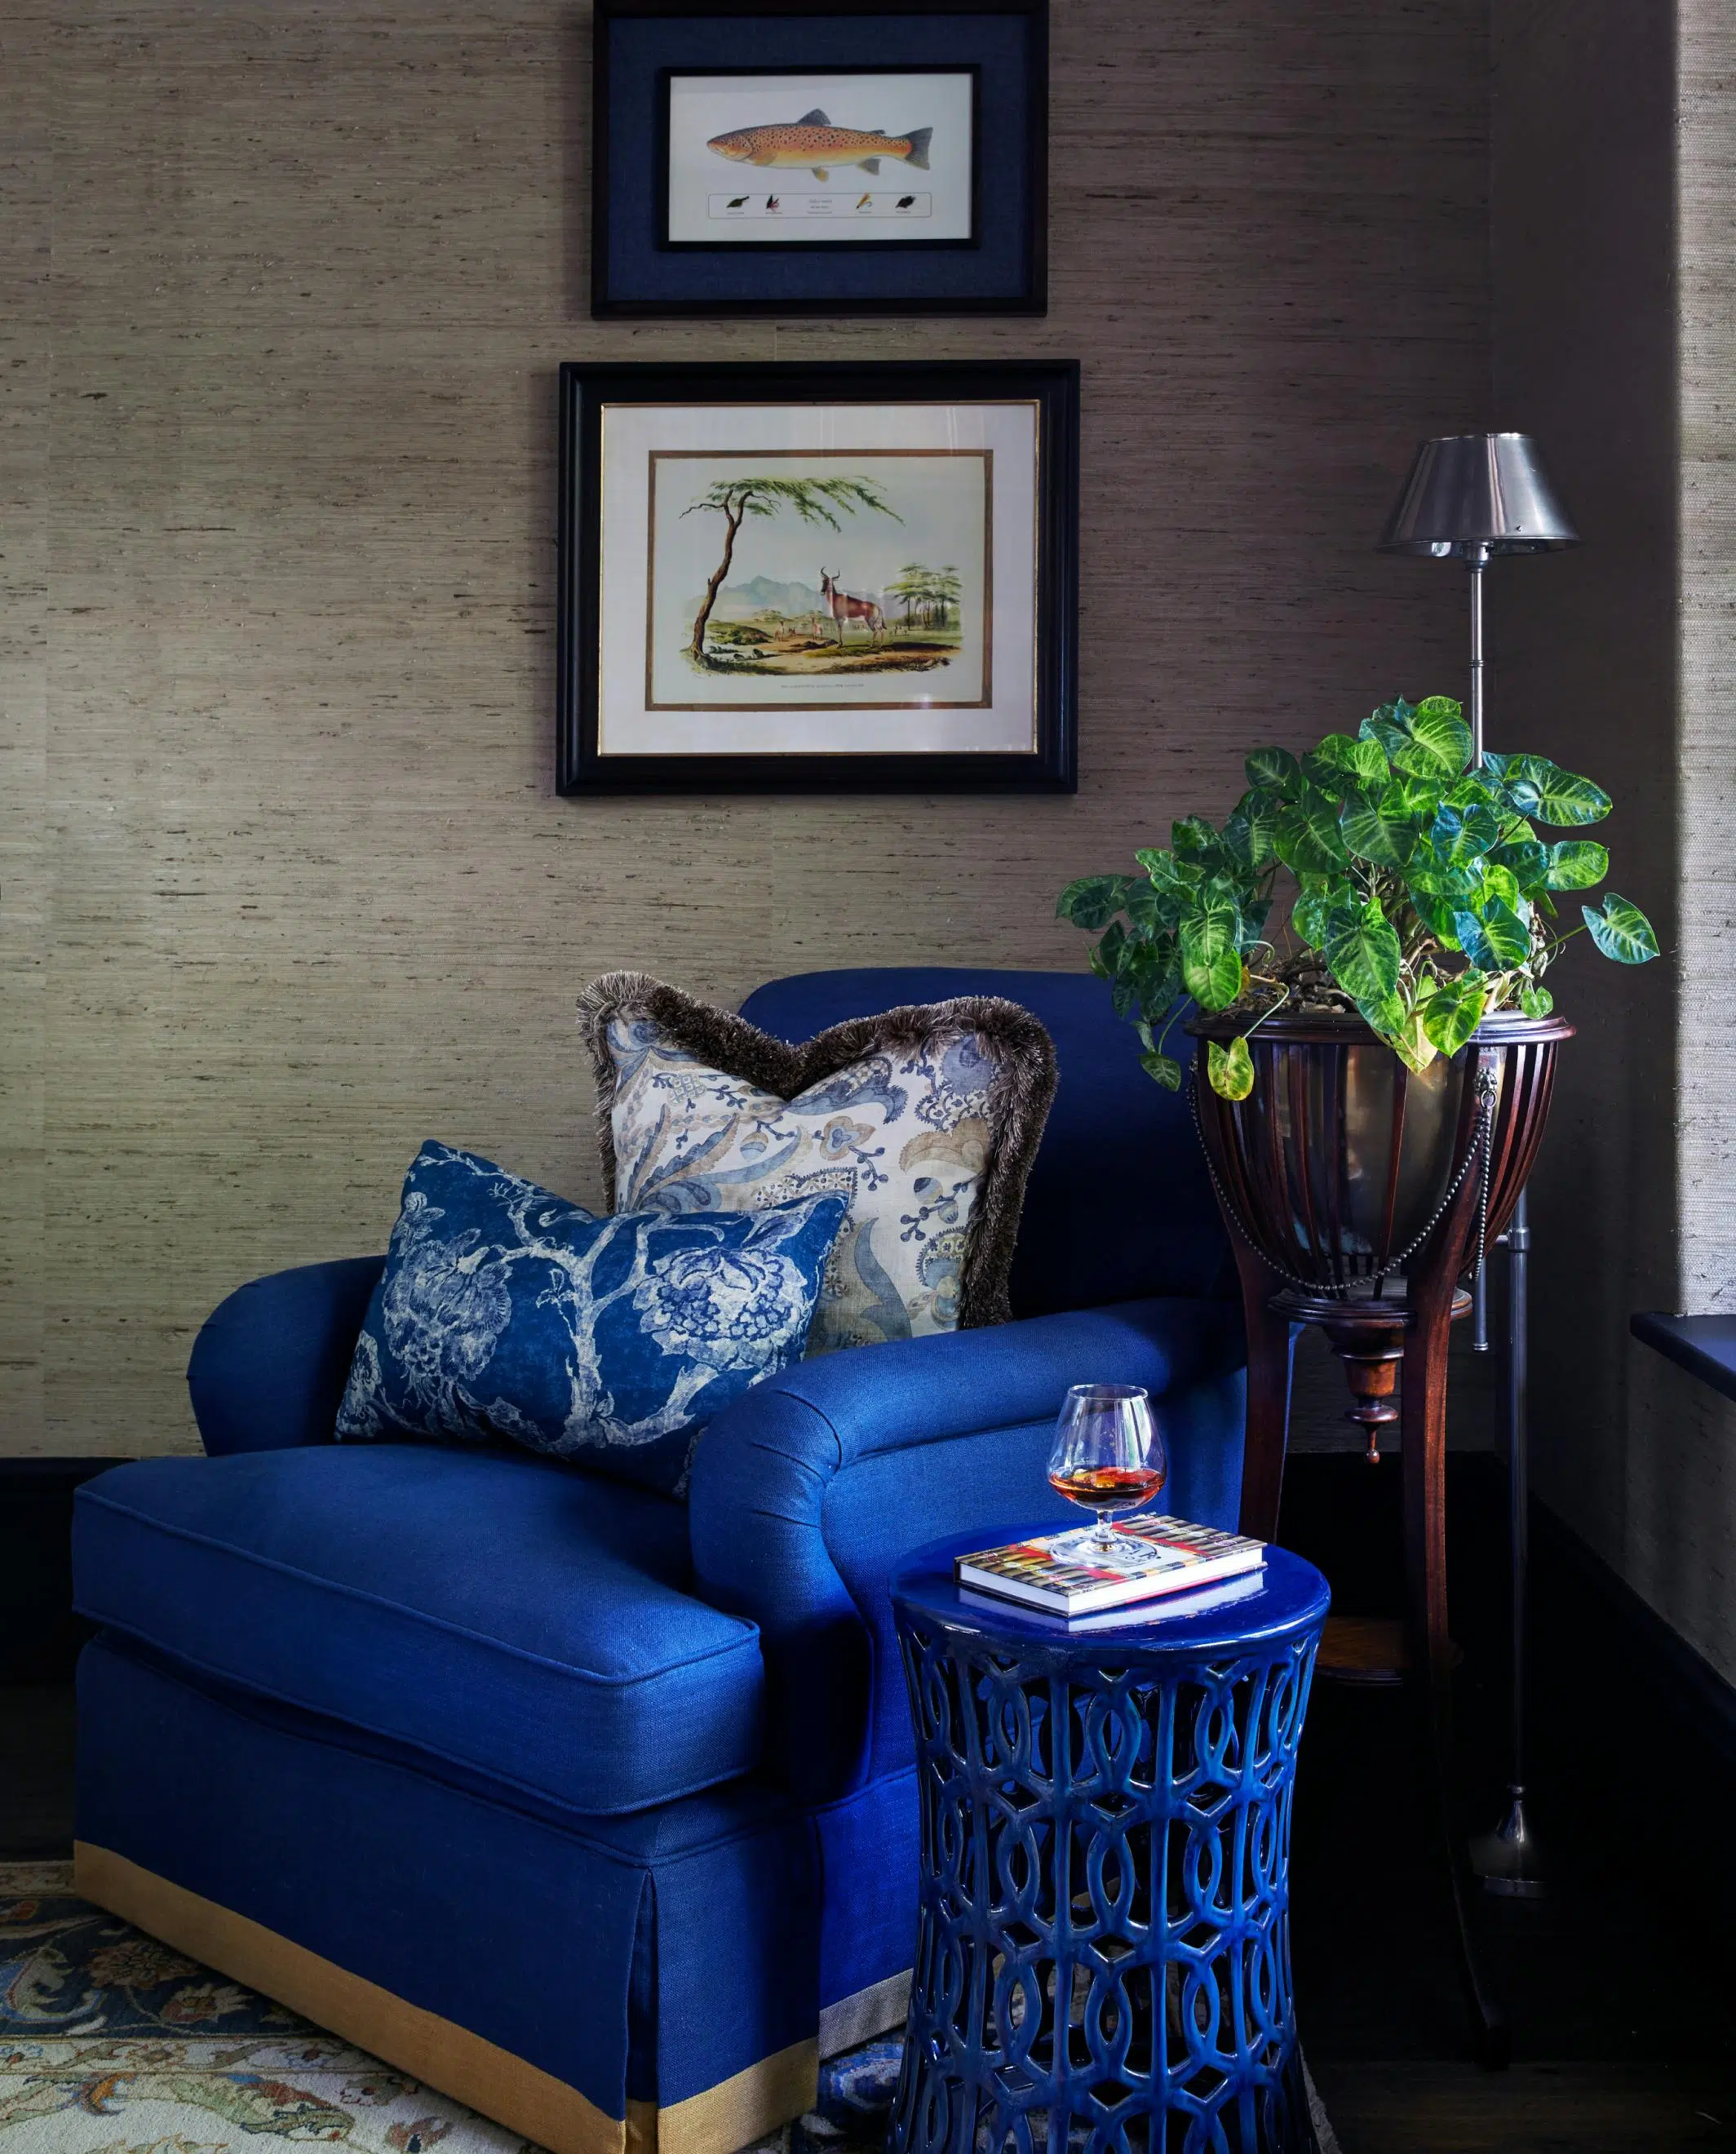 A blue side table with a book and a glass of wine placed on top in front of a blue armchair with marine-inspired artwork hanging above.